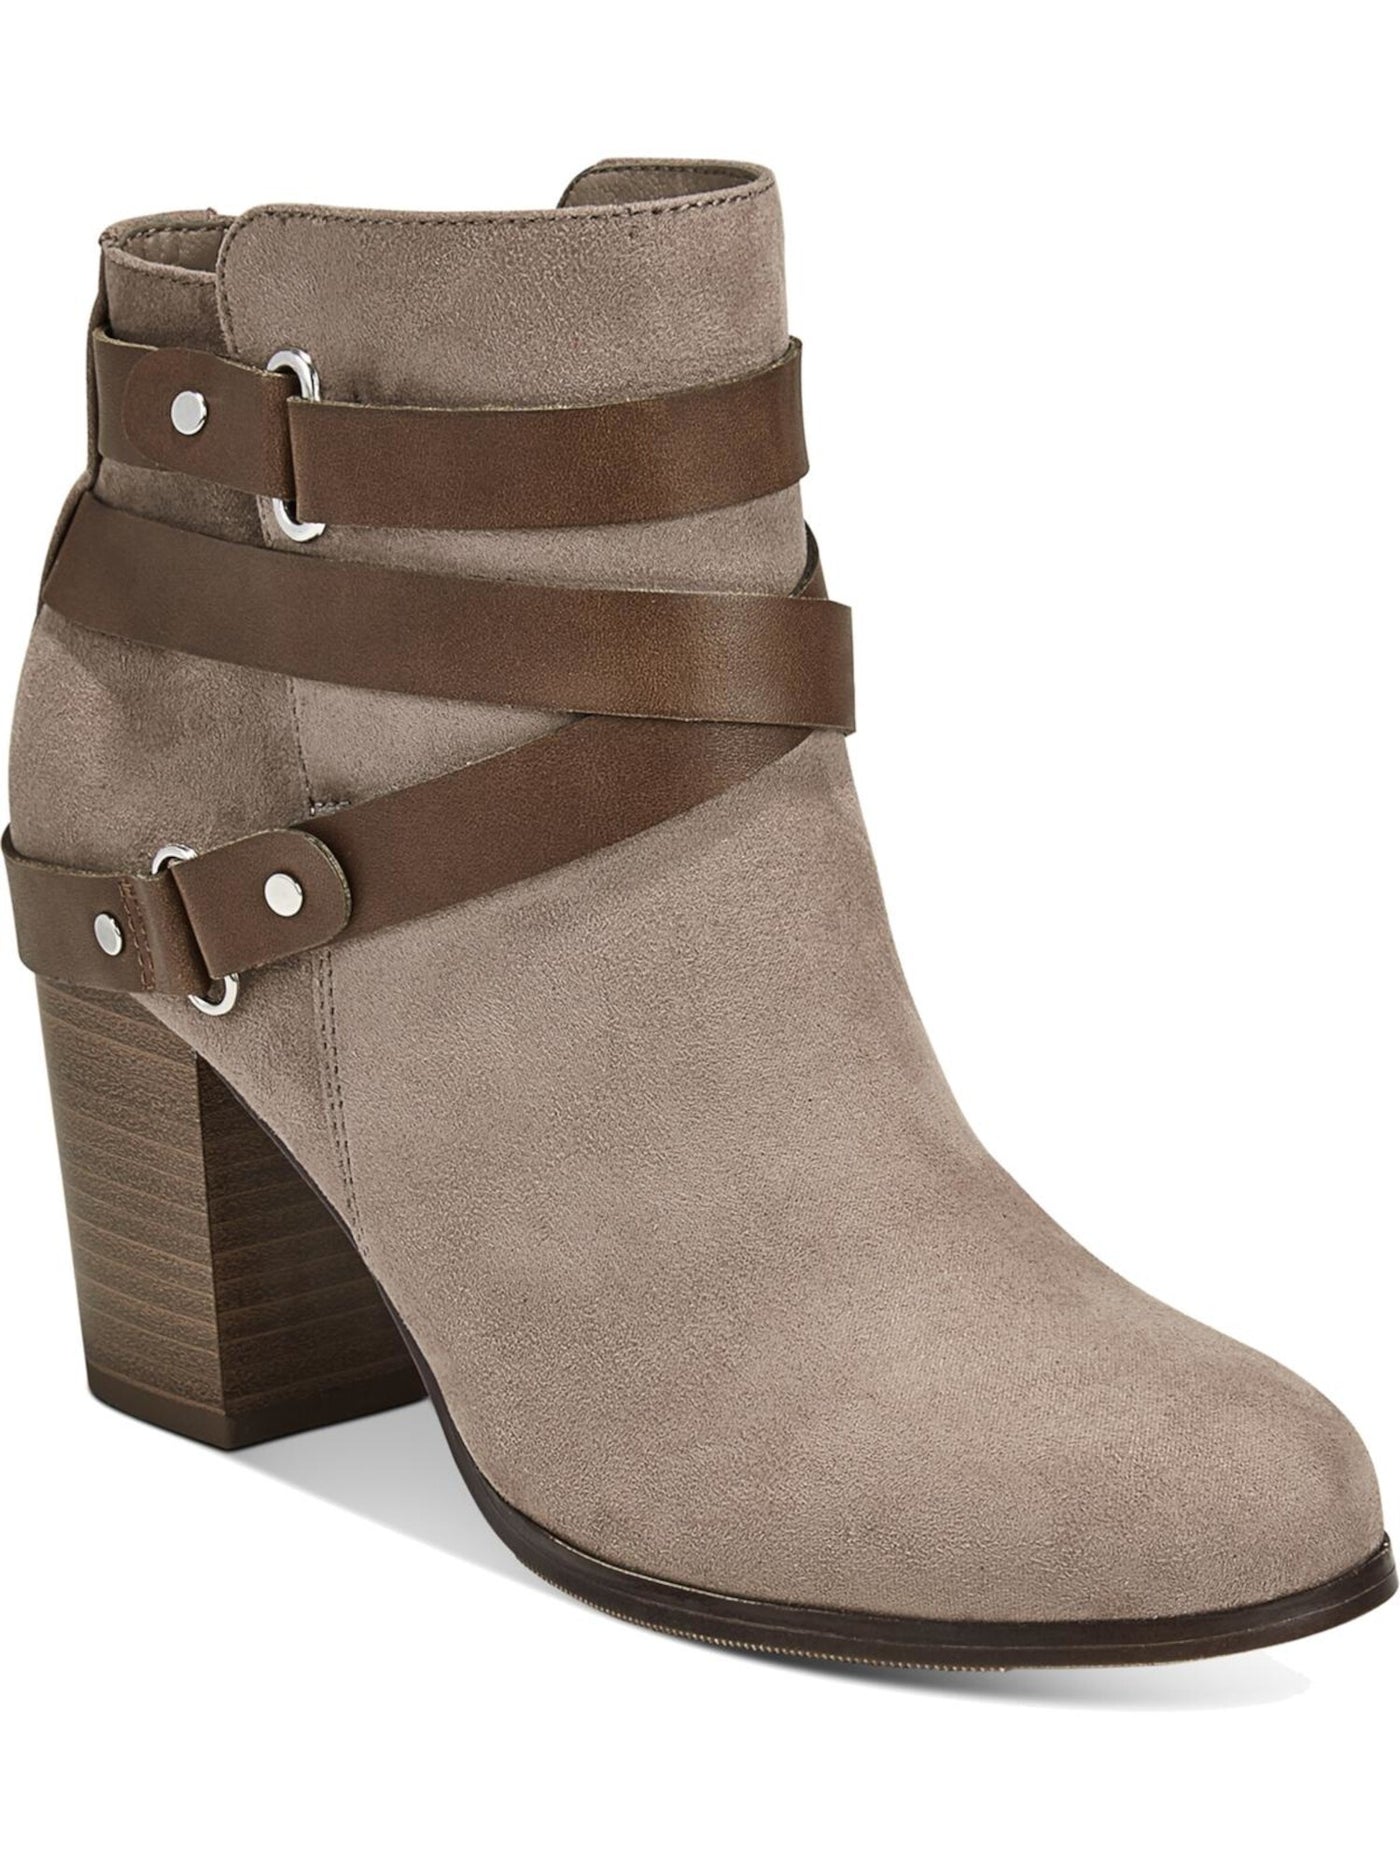 MATERIAL GIRL Womens Beige Buckled Strap Hardware Detail Cushioned Melany Round Toe Block Heel Zip-Up Booties 10.5 M